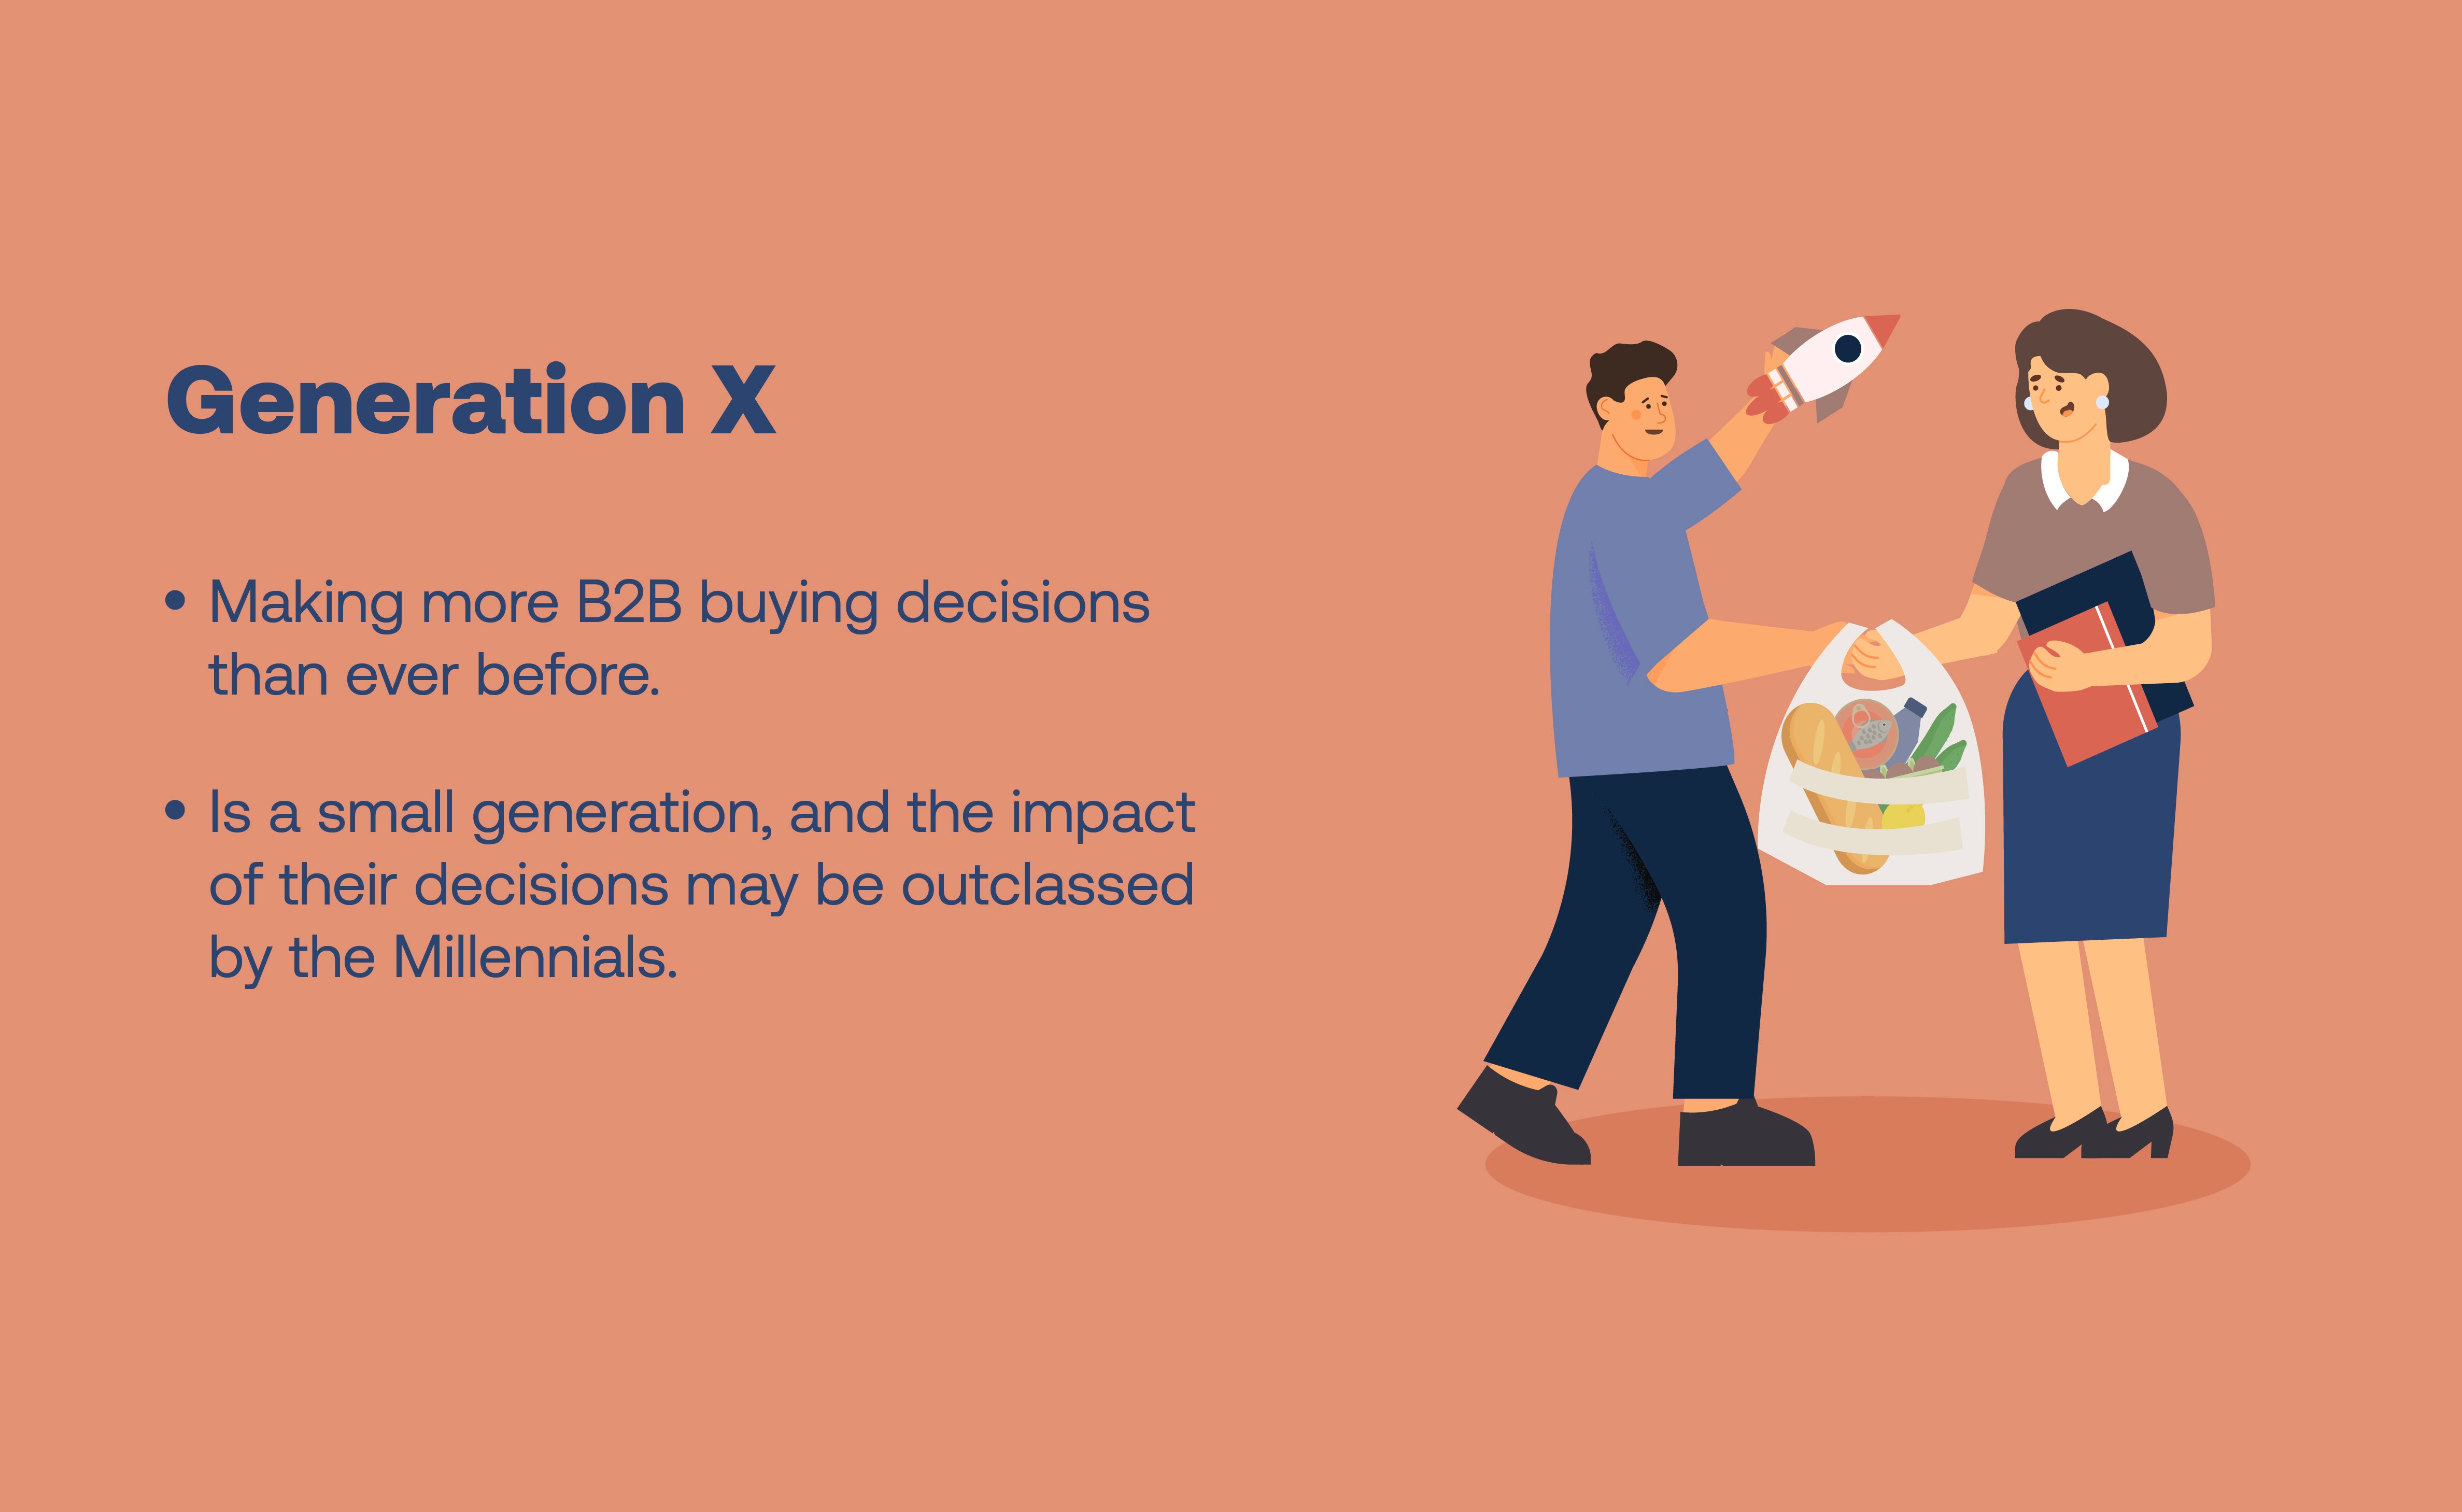 generation x making b2b buying decisions and deciding where to spend money